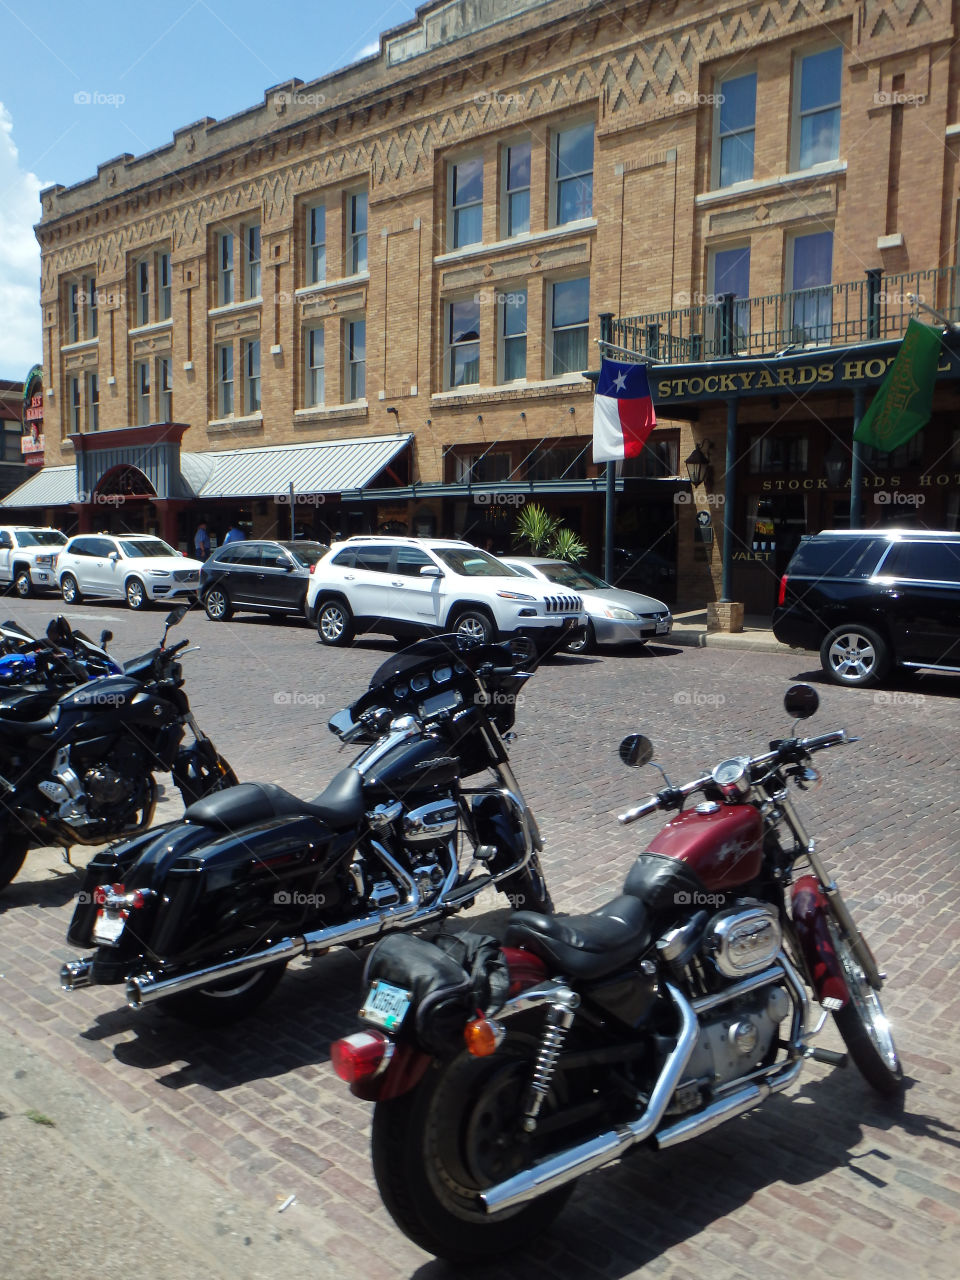 Fort Worth stockyards hotel and motorcycles